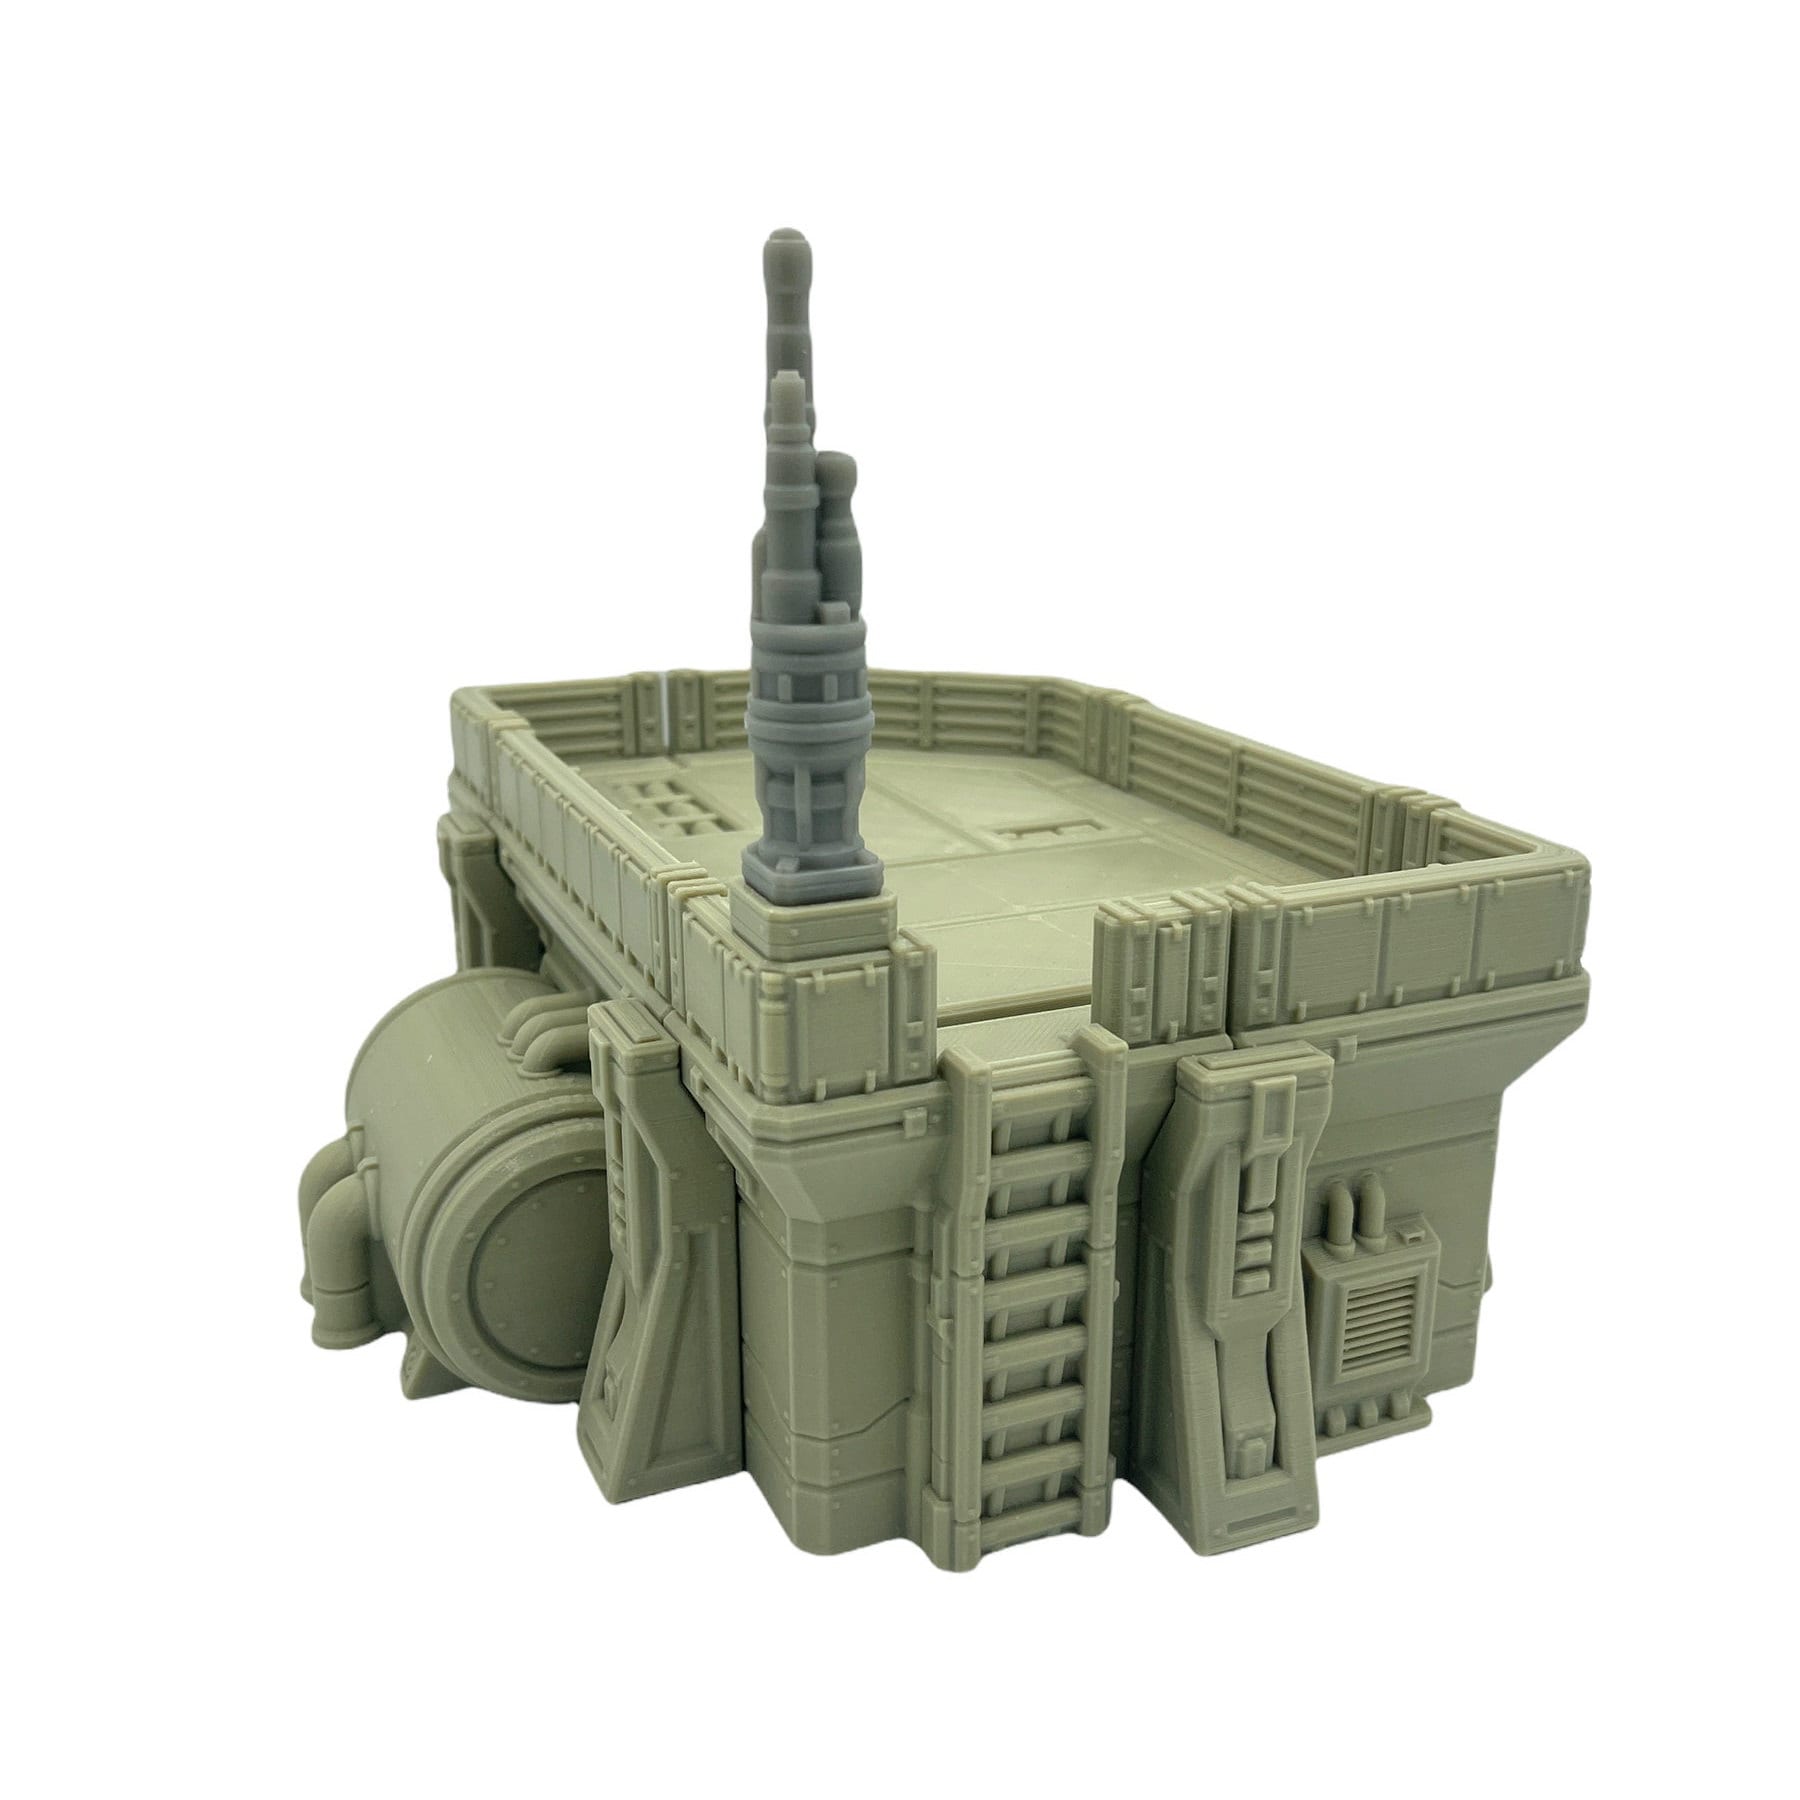 Outpost 21 - Cryolab / Forbidden Prints / RPG and Wargame 3d Printed Tabletop Terrain / Licensed Printer